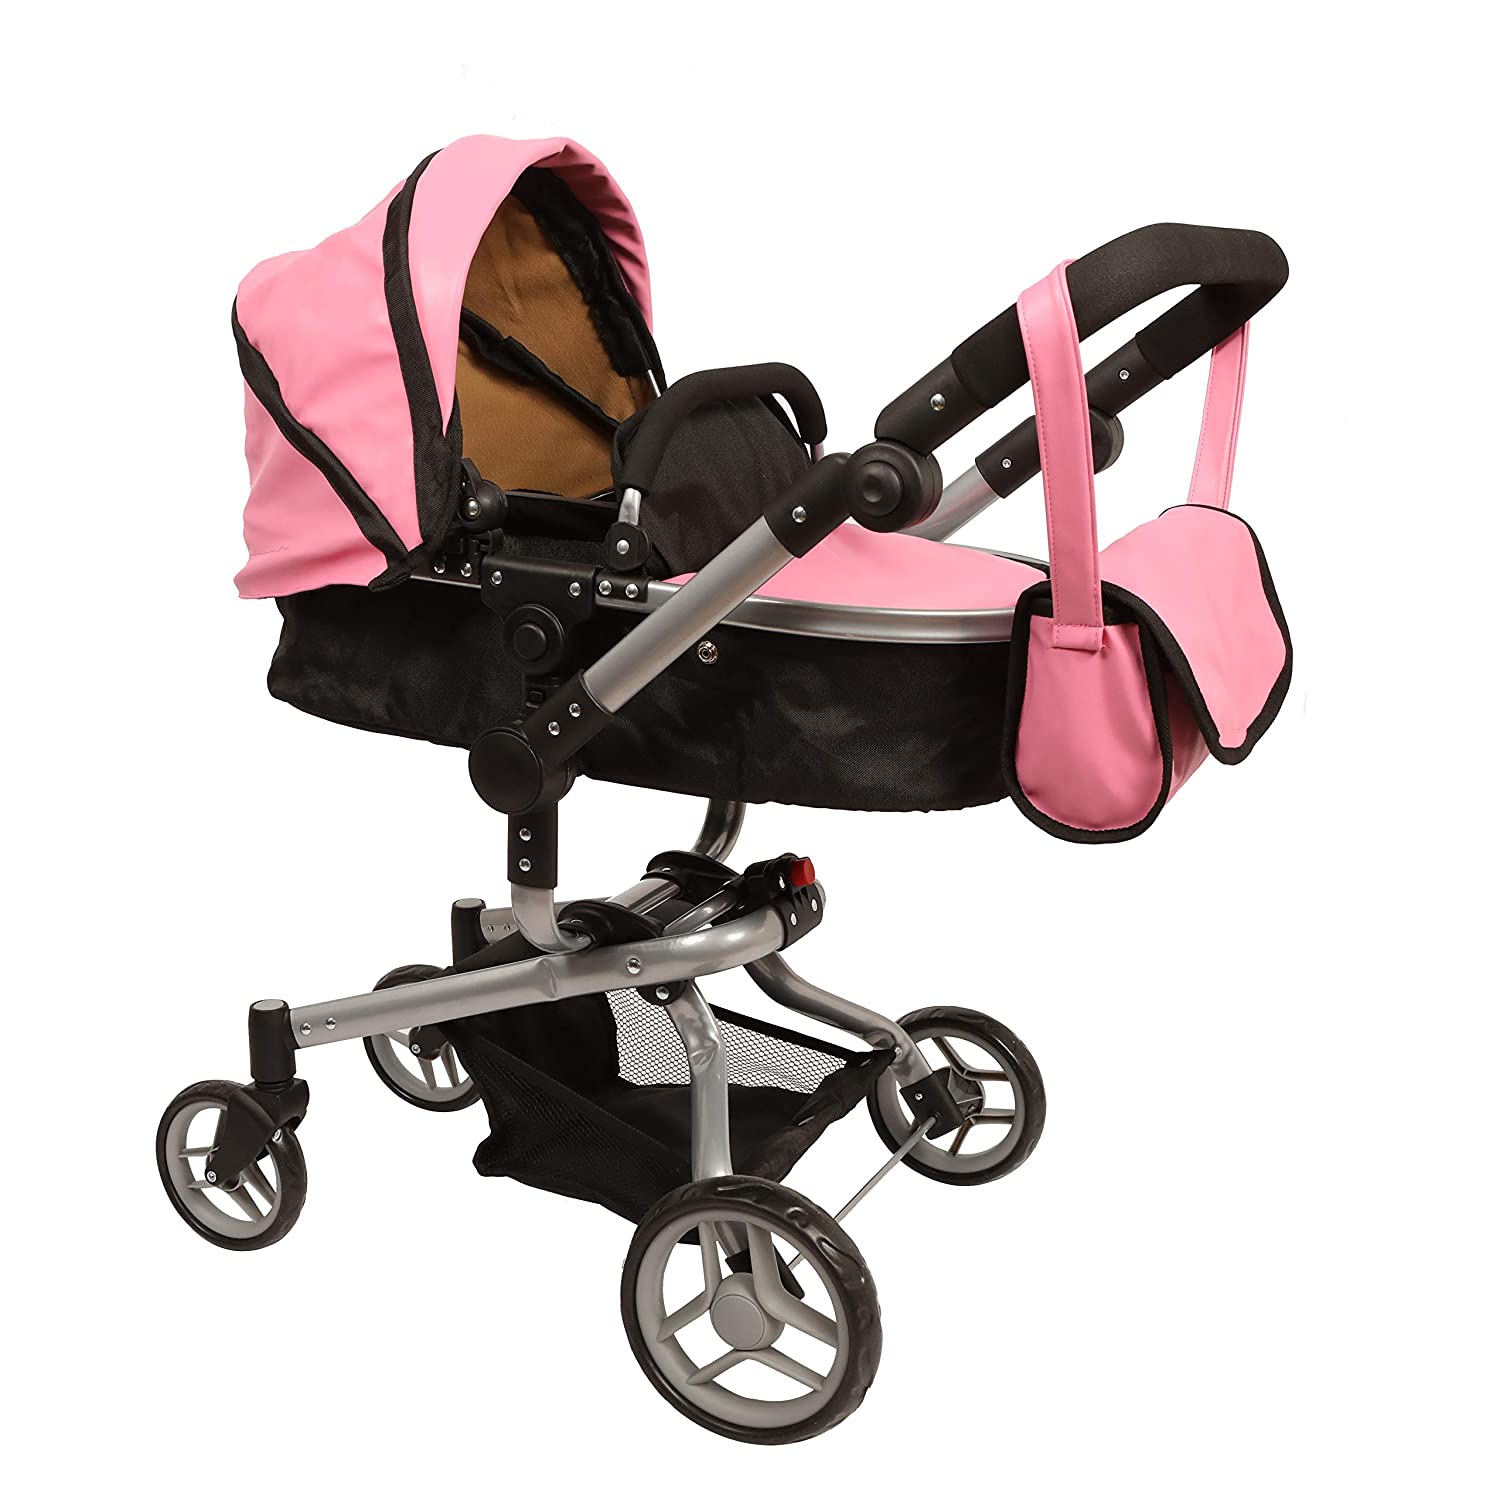 Mommy & me 2 in 1 Deluxe Leather doll stroller EXTRA TALL 32'' HIGH